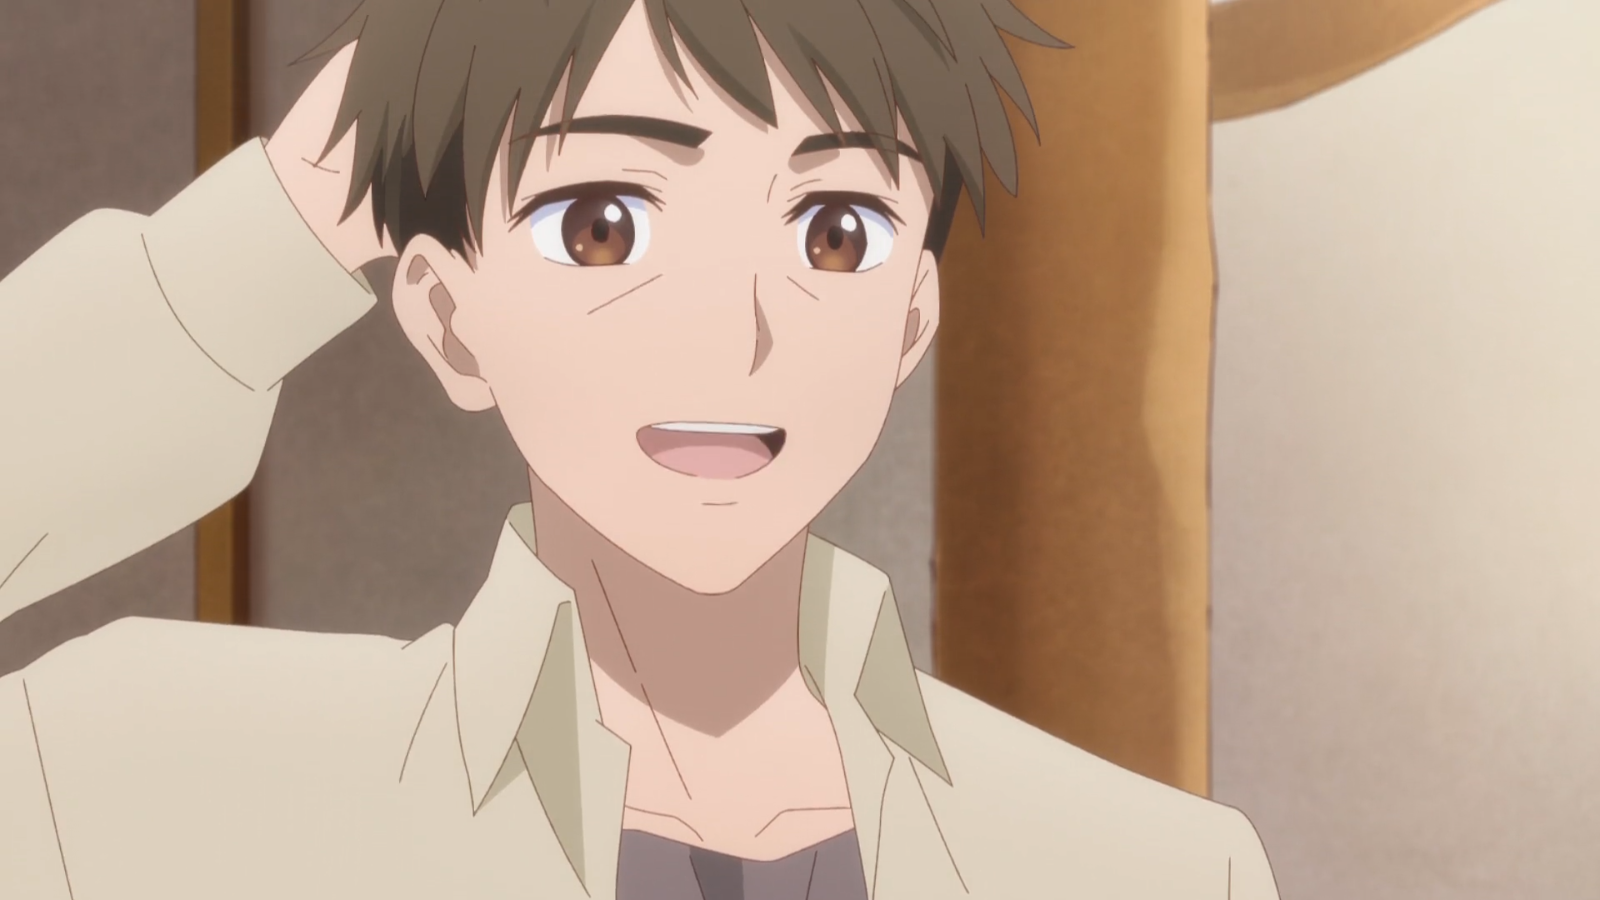 Who Is Tsubasa's Father in Hokkaido Gals Are Adorable? His Personality Revealed